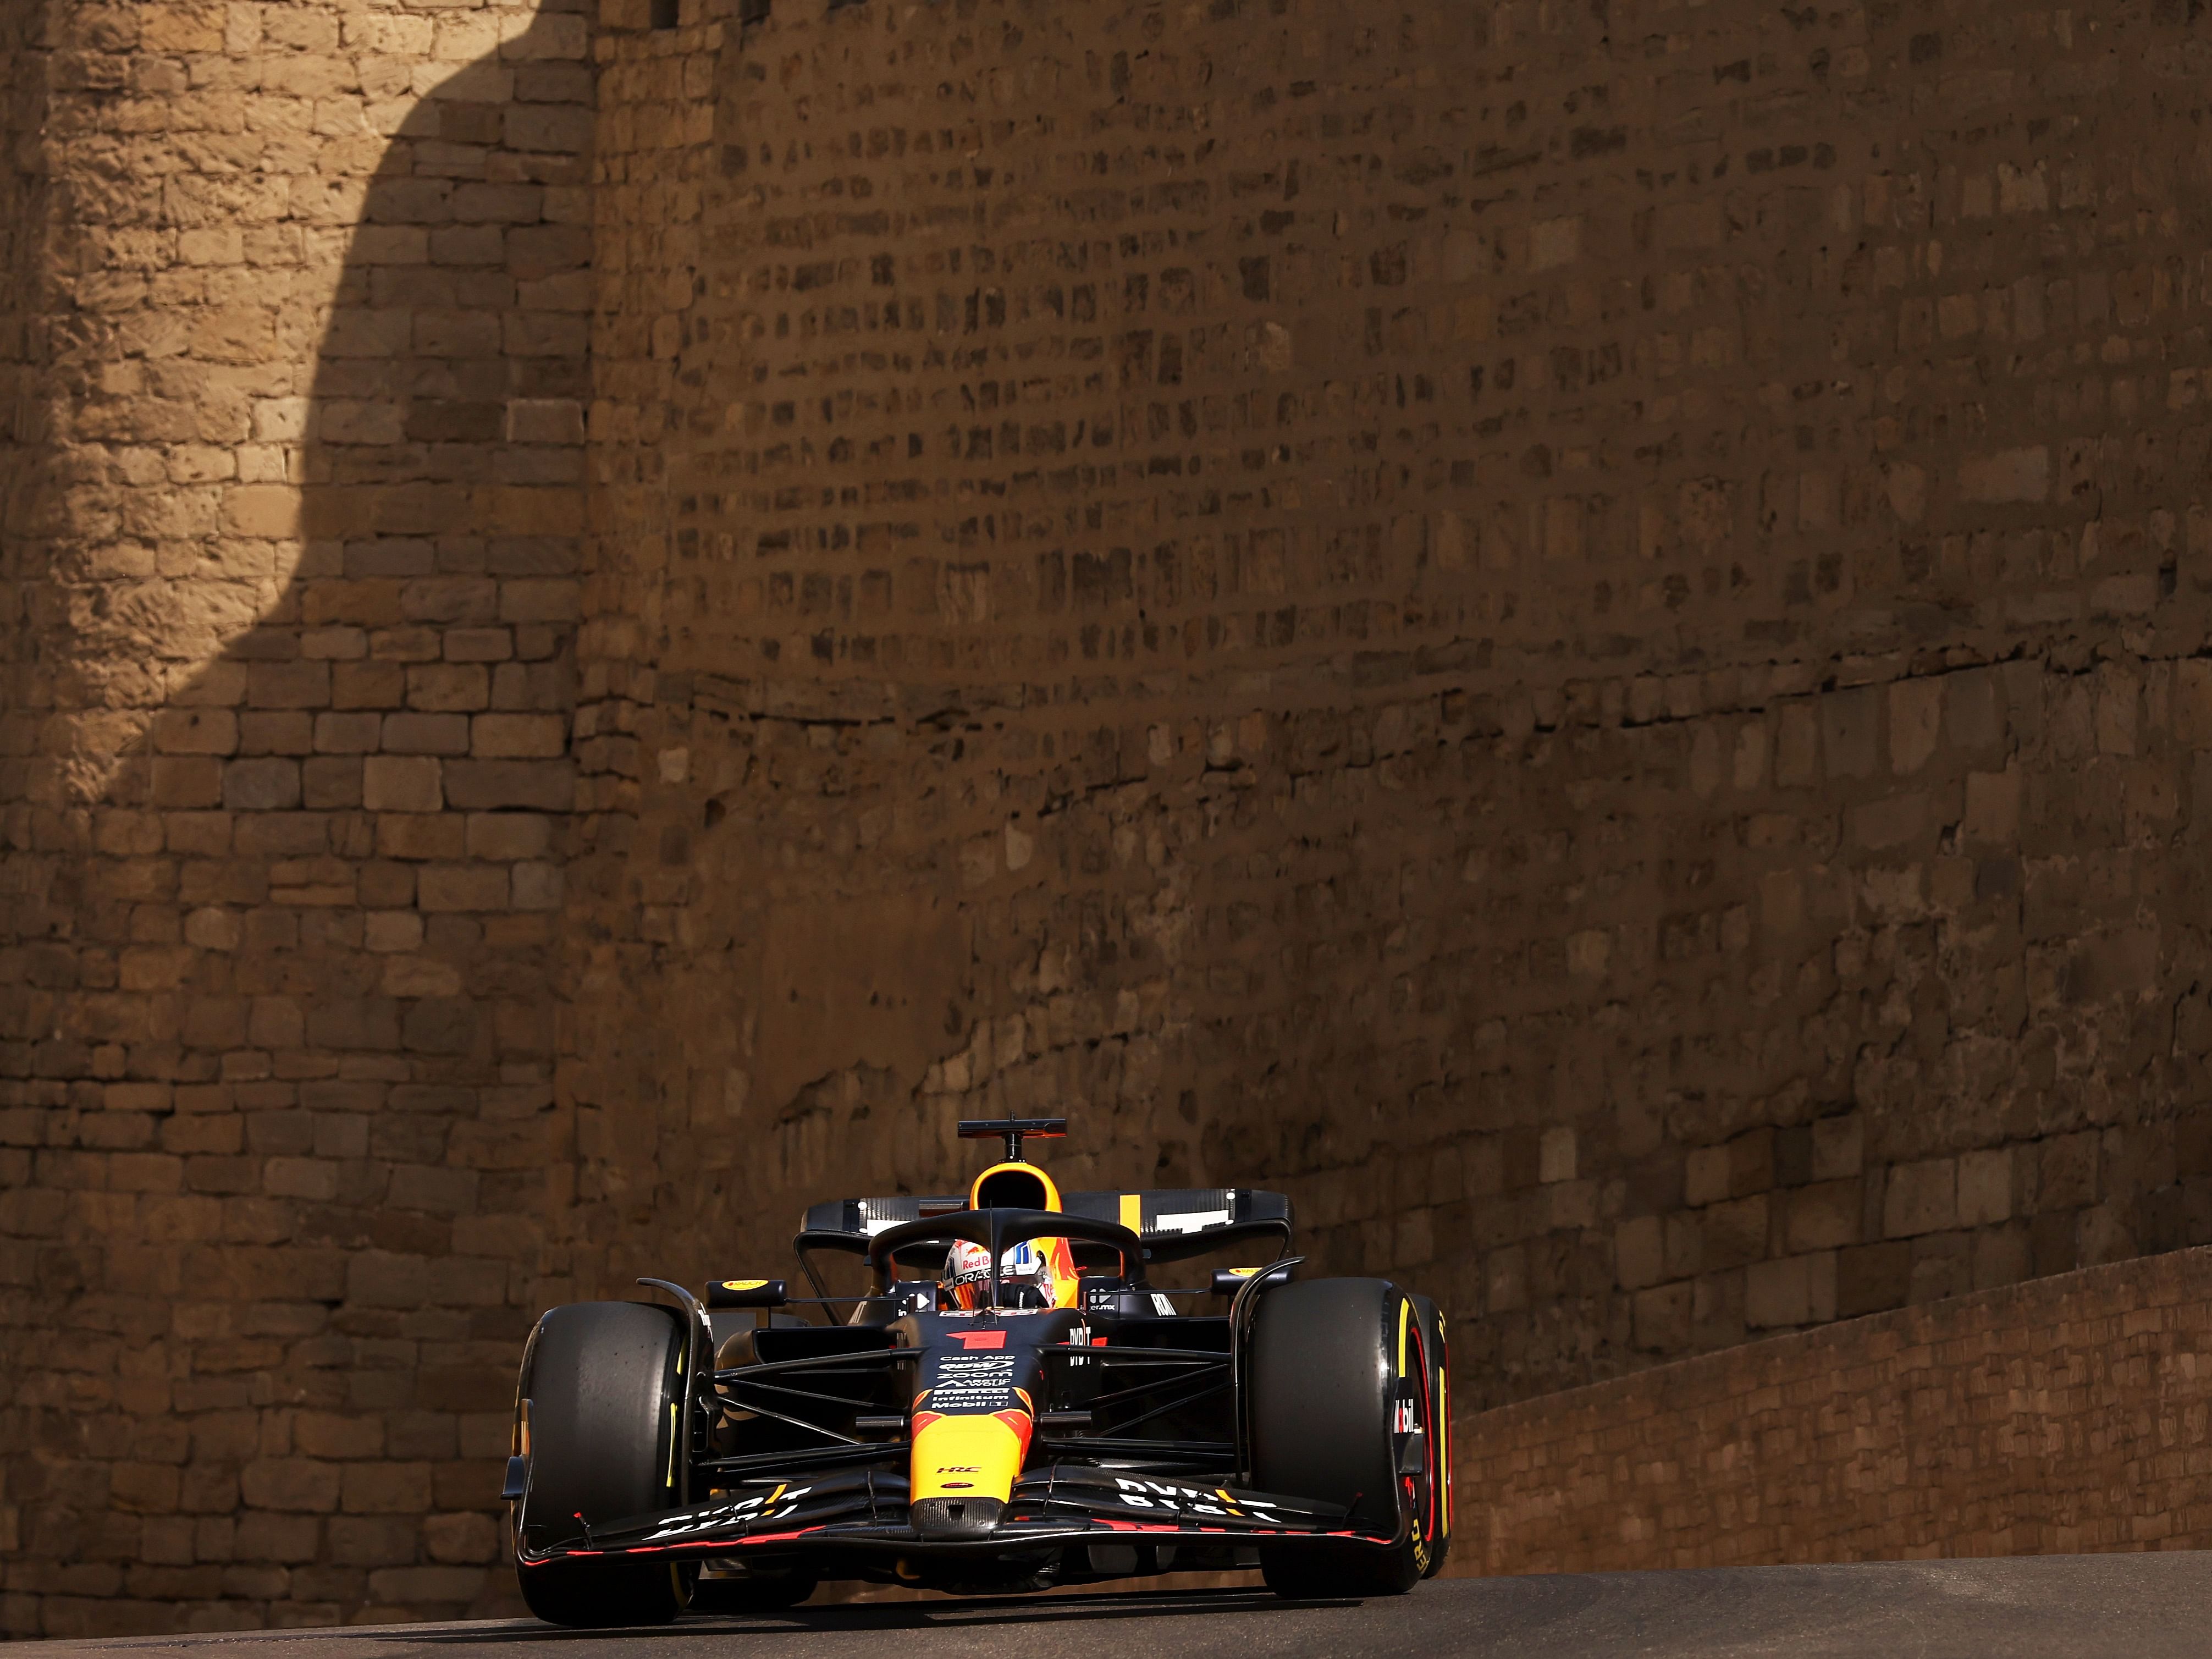 Max Verstappen (1) on track during the 2023 F1 Azerbaijan Grand Prix. (Photo by Francois Nel/Getty Images)